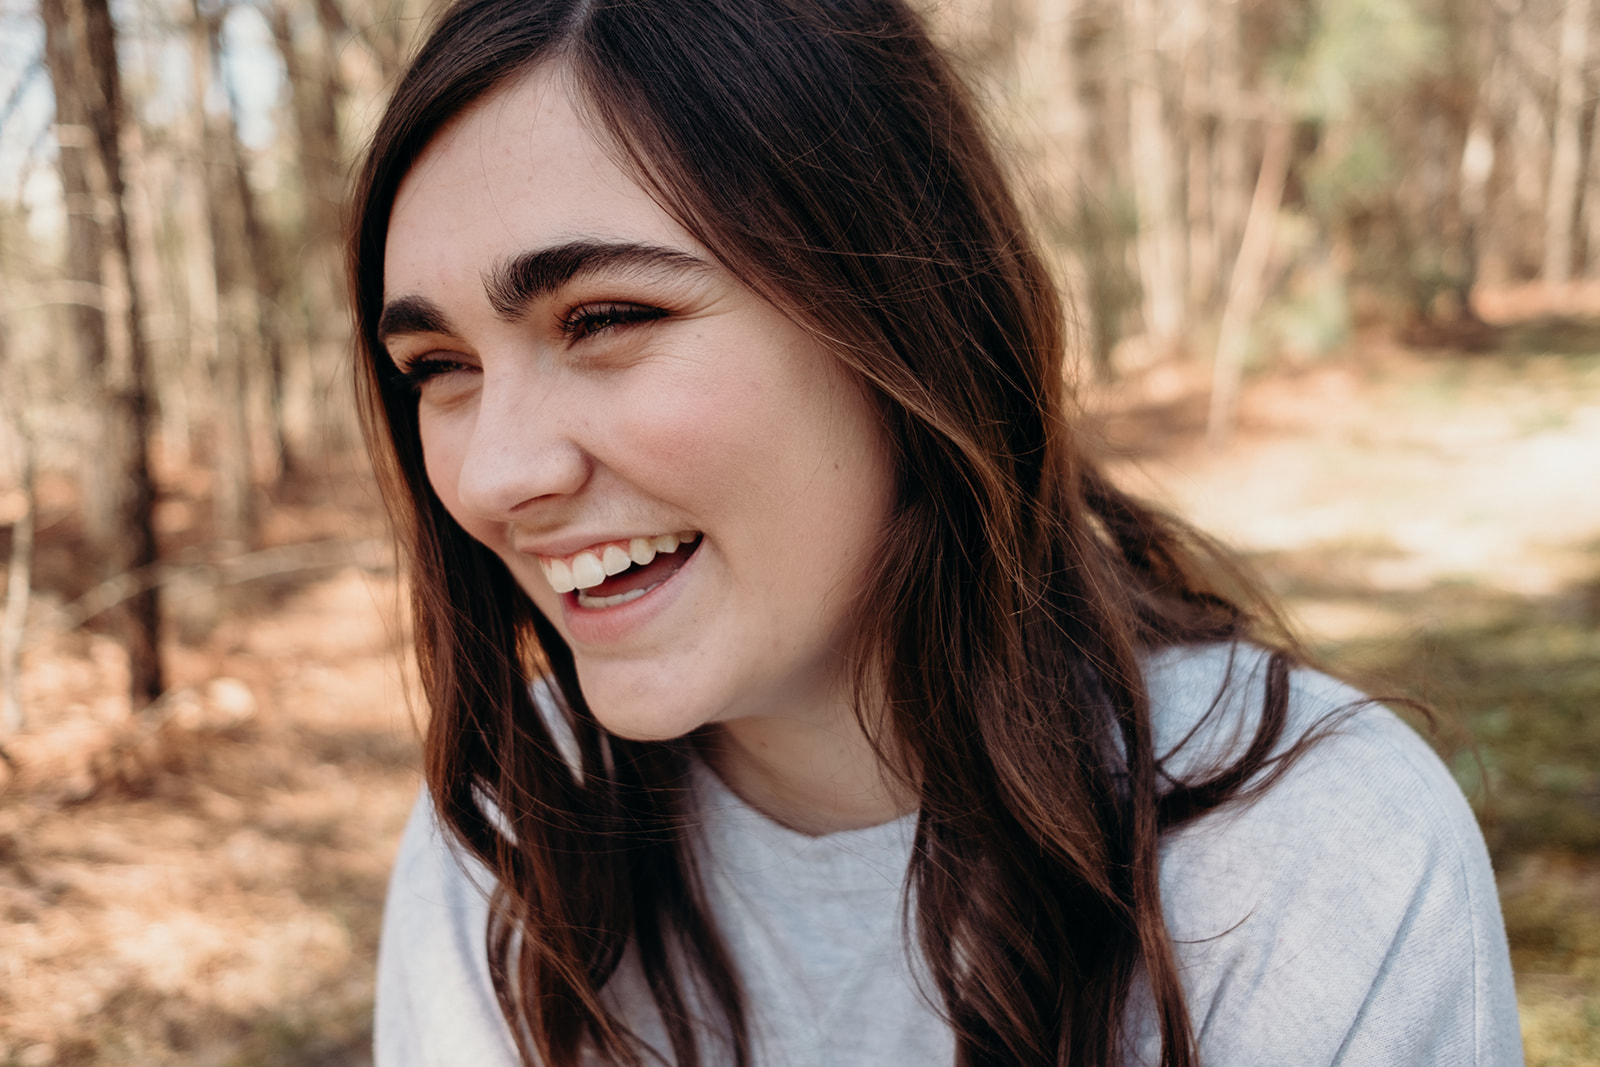 A girl laughs while enjoy the spring during her senior portrait photo session. 